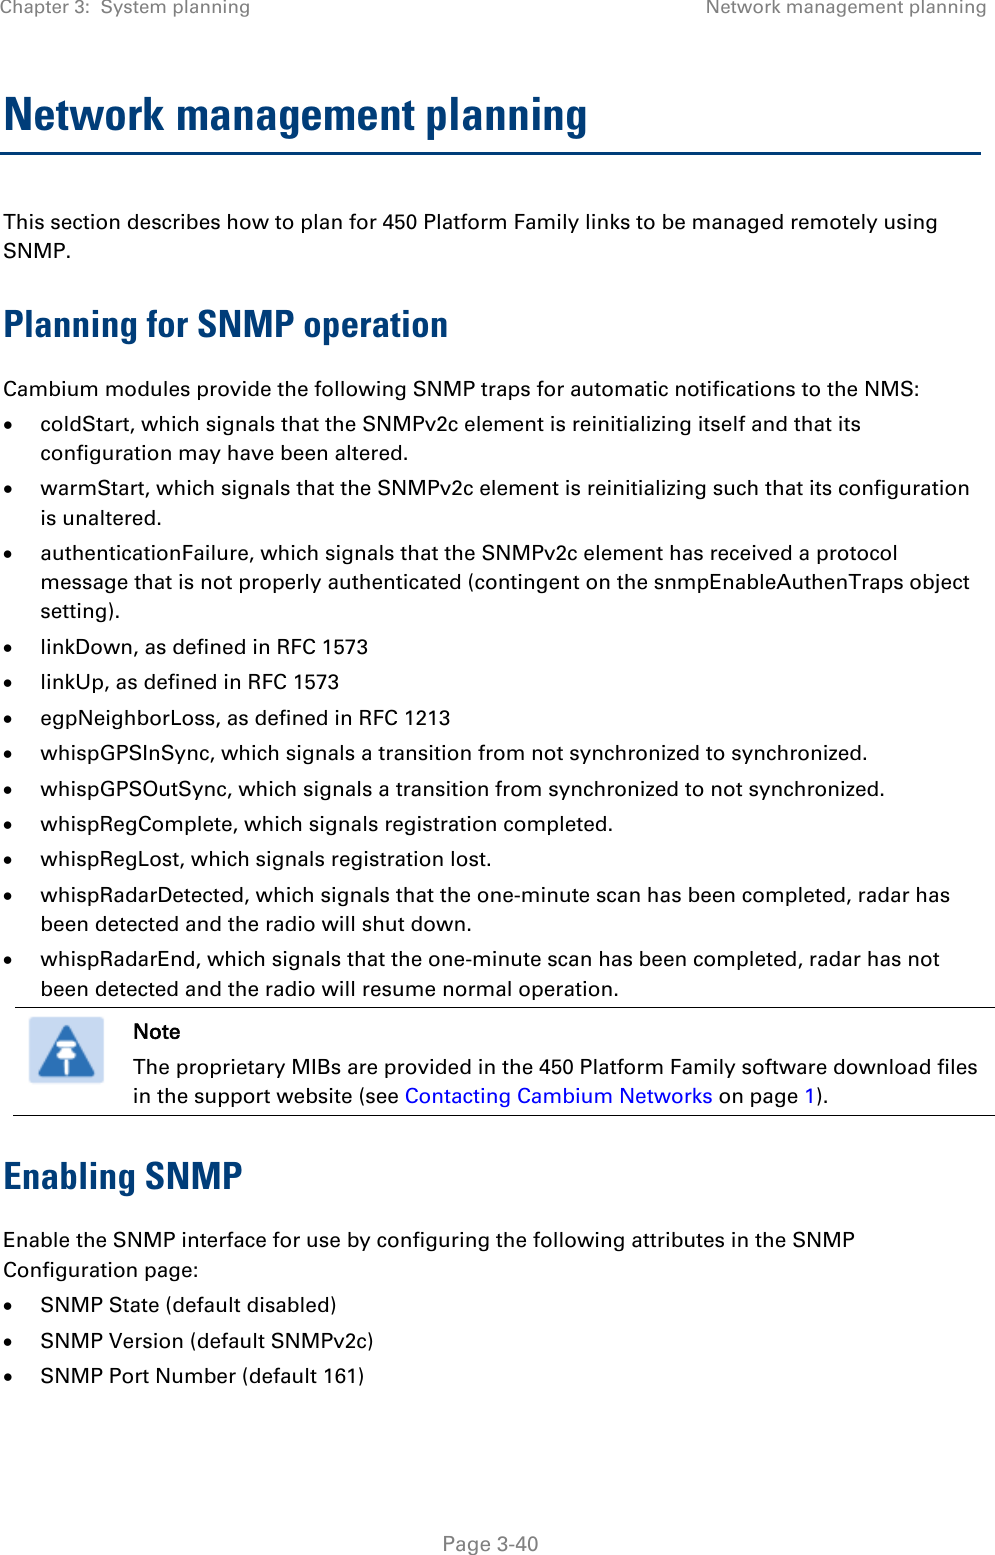 Chapter 3:  System planning Network management planning   Page 3-40 Network management planning This section describes how to plan for 450 Platform Family links to be managed remotely using SNMP. Planning for SNMP operation Cambium modules provide the following SNMP traps for automatic notifications to the NMS: • coldStart, which signals that the SNMPv2c element is reinitializing itself and that its configuration may have been altered. • warmStart, which signals that the SNMPv2c element is reinitializing such that its configuration is unaltered. • authenticationFailure, which signals that the SNMPv2c element has received a protocol message that is not properly authenticated (contingent on the snmpEnableAuthenTraps object setting). • linkDown, as defined in RFC 1573 • linkUp, as defined in RFC 1573 • egpNeighborLoss, as defined in RFC 1213 • whispGPSInSync, which signals a transition from not synchronized to synchronized. • whispGPSOutSync, which signals a transition from synchronized to not synchronized. • whispRegComplete, which signals registration completed.  • whispRegLost, which signals registration lost.  • whispRadarDetected, which signals that the one-minute scan has been completed, radar has been detected and the radio will shut down.  • whispRadarEnd, which signals that the one-minute scan has been completed, radar has not been detected and the radio will resume normal operation.   Note The proprietary MIBs are provided in the 450 Platform Family software download files in the support website (see Contacting Cambium Networks on page 1). Enabling SNMP Enable the SNMP interface for use by configuring the following attributes in the SNMP Configuration page: • SNMP State (default disabled) • SNMP Version (default SNMPv2c) • SNMP Port Number (default 161) 